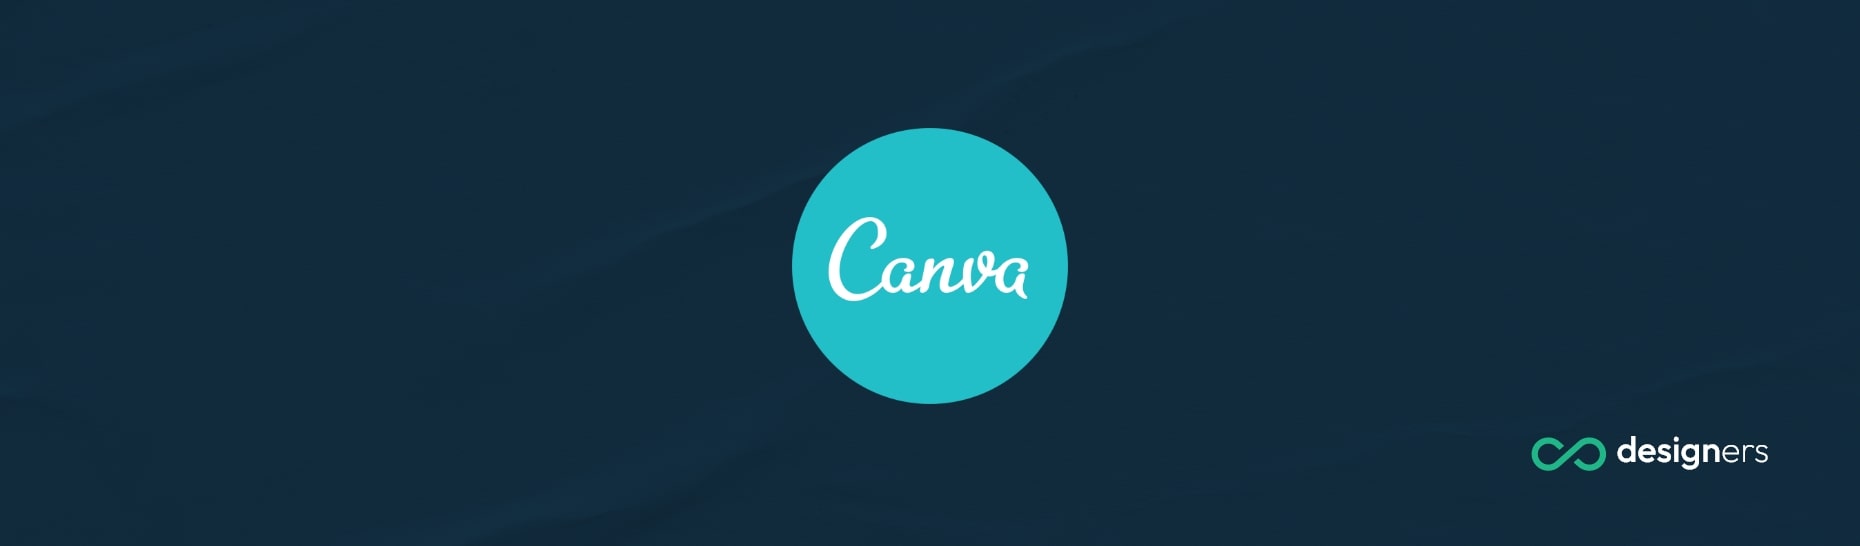 Can You Erase Part of an Image in Canva?